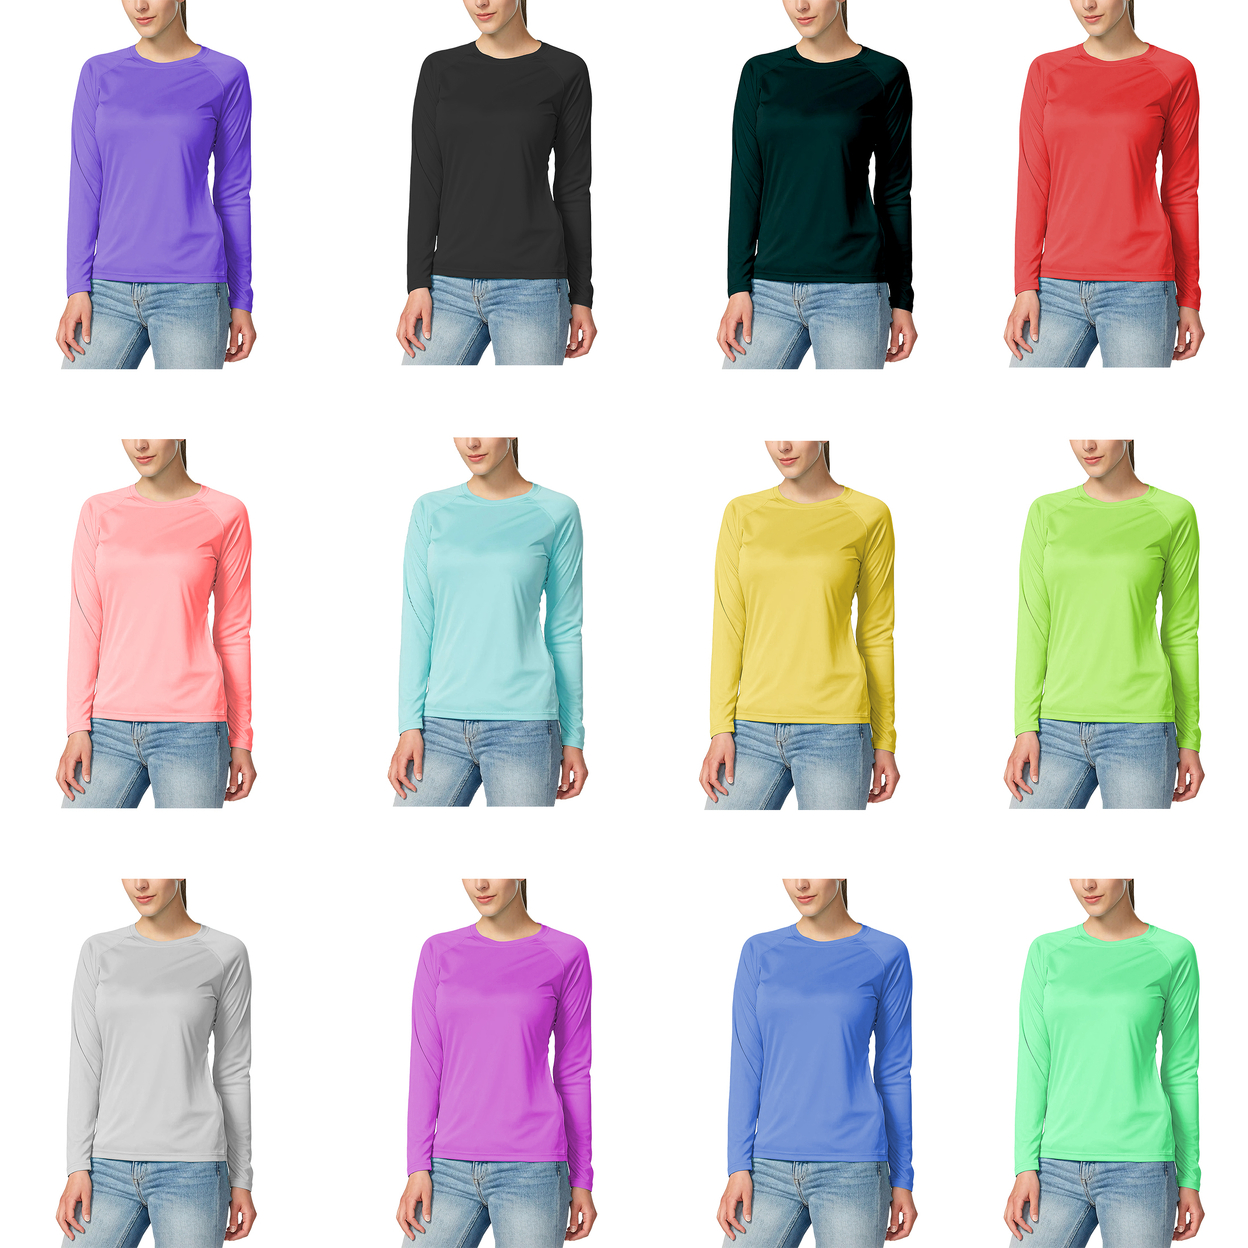 5-Pack: Women's Dri-Fit Moisture-Wicking Breathable Long Sleeve T-Shirt - X-large